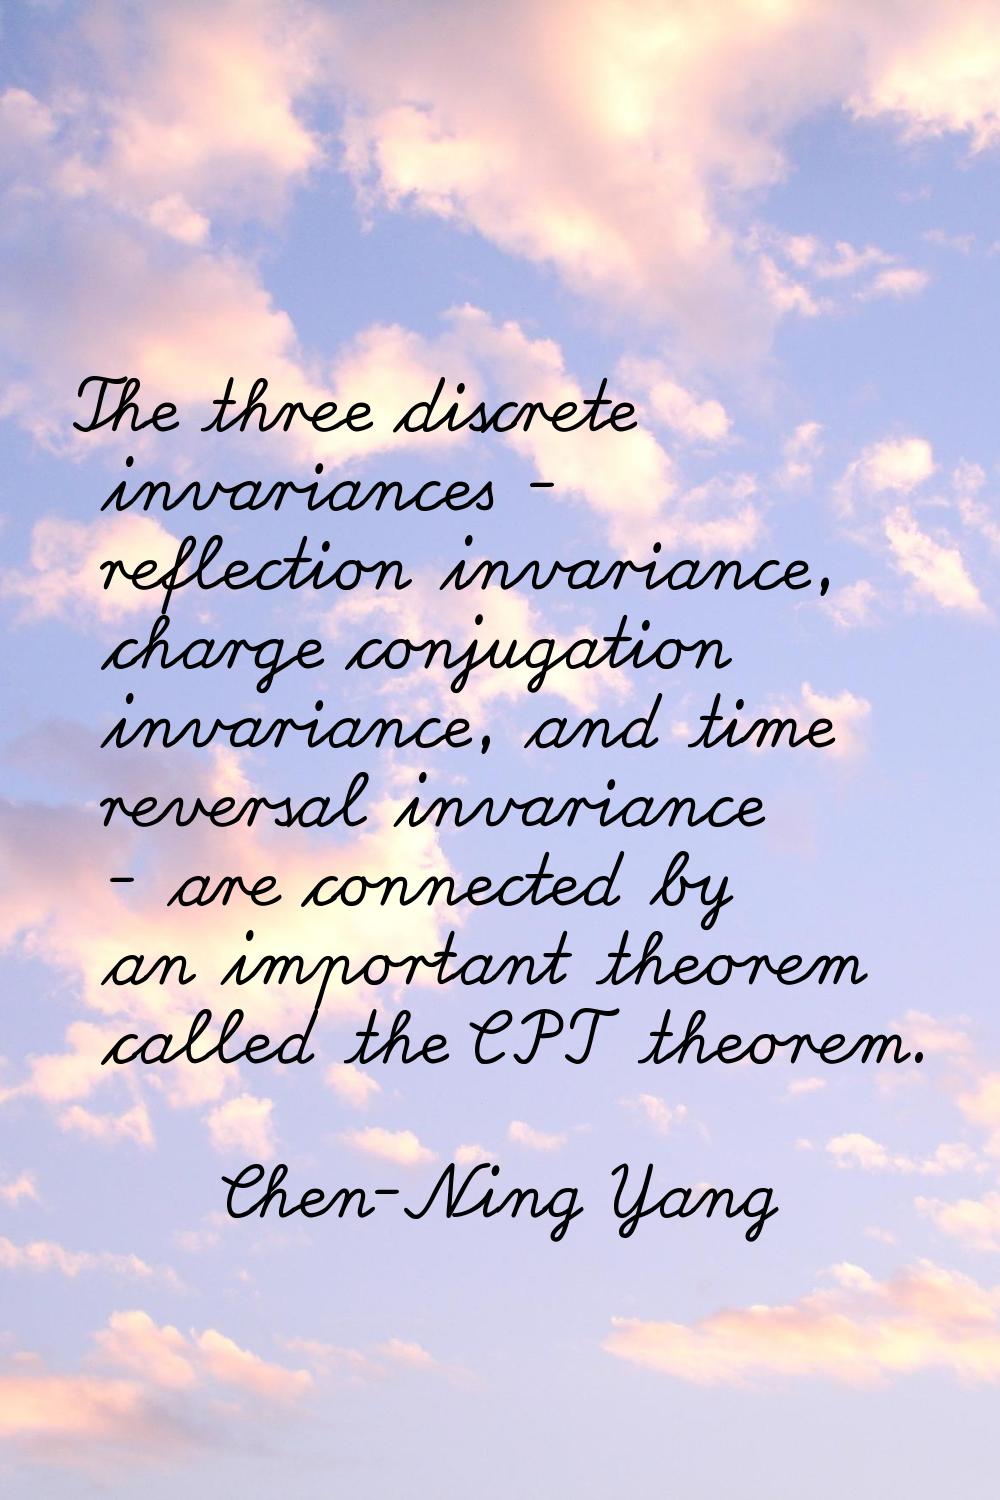 The three discrete invariances - reflection invariance, charge conjugation invariance, and time rev